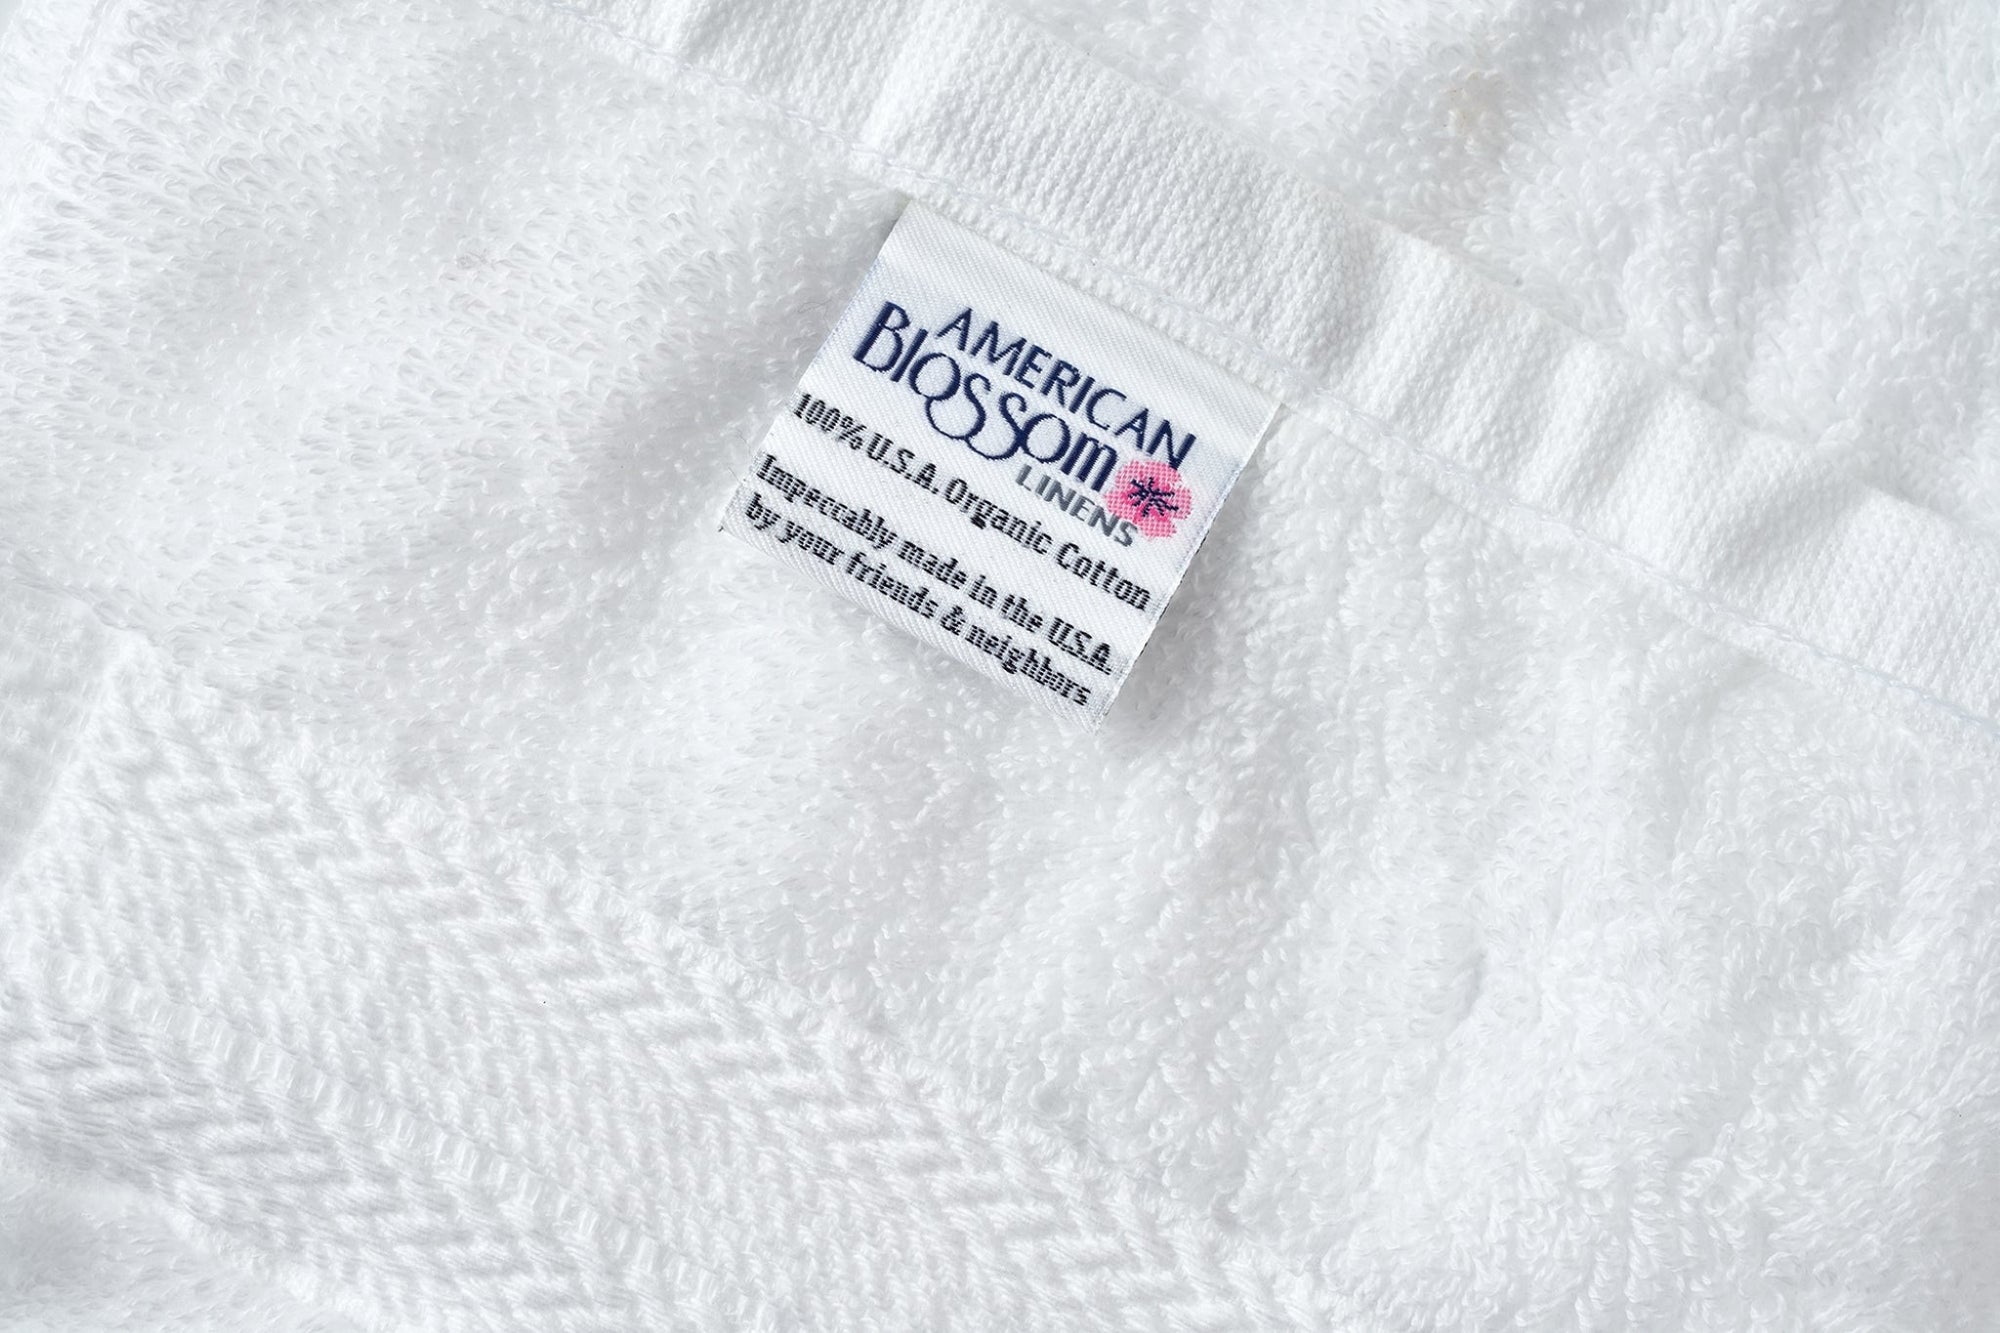 Stacked Bath Towels Color White and Natural Bath Towels Ethically Made Luxury Cotton Made in USA